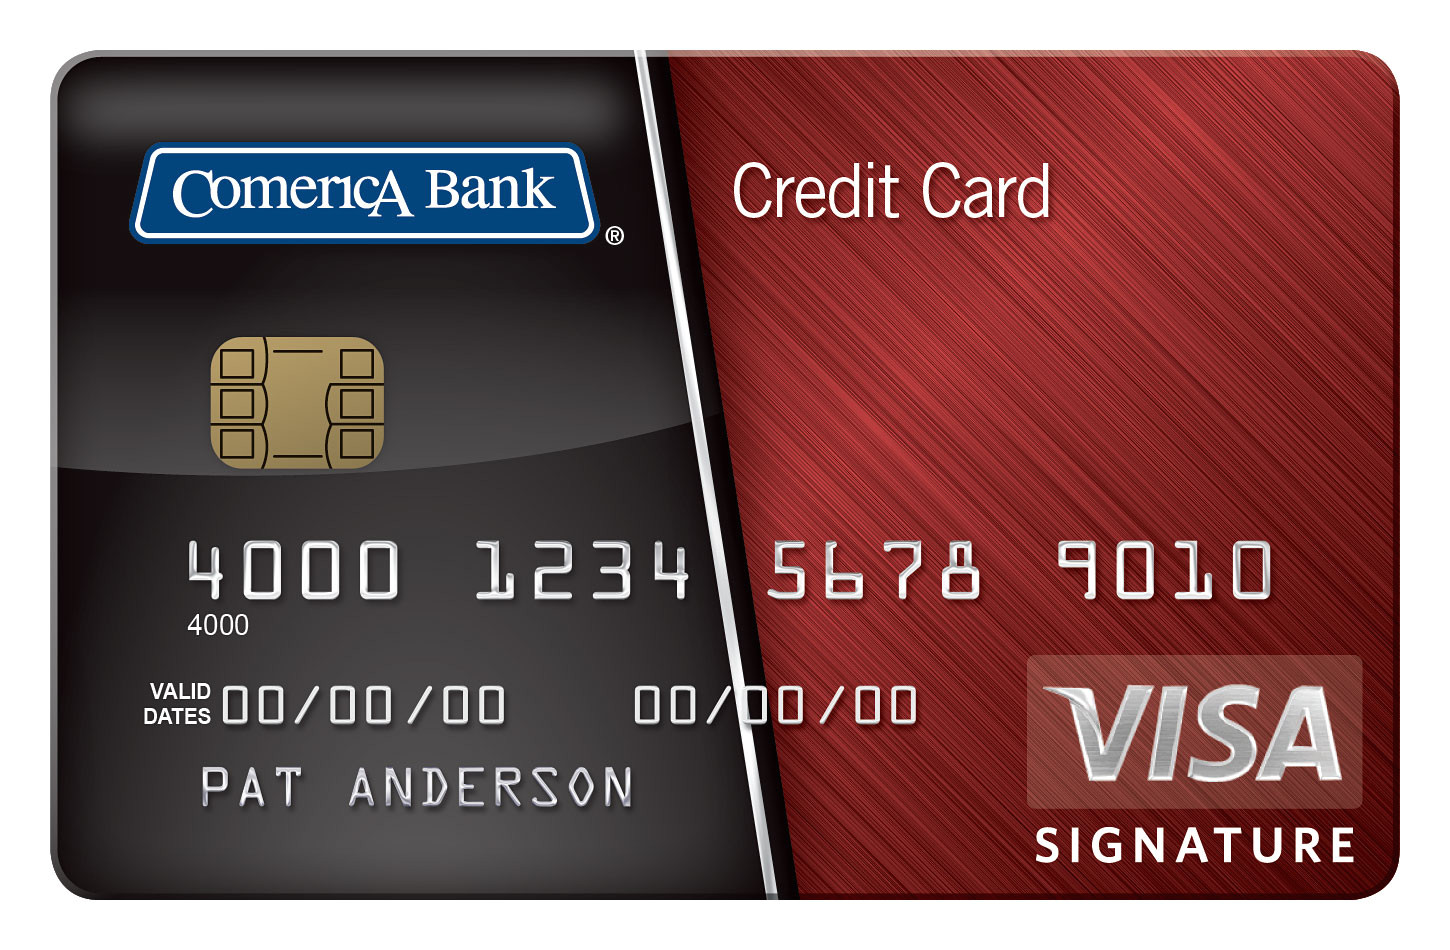 visaa real rewards card earn everyday rewards with every qualifying net purchase 7